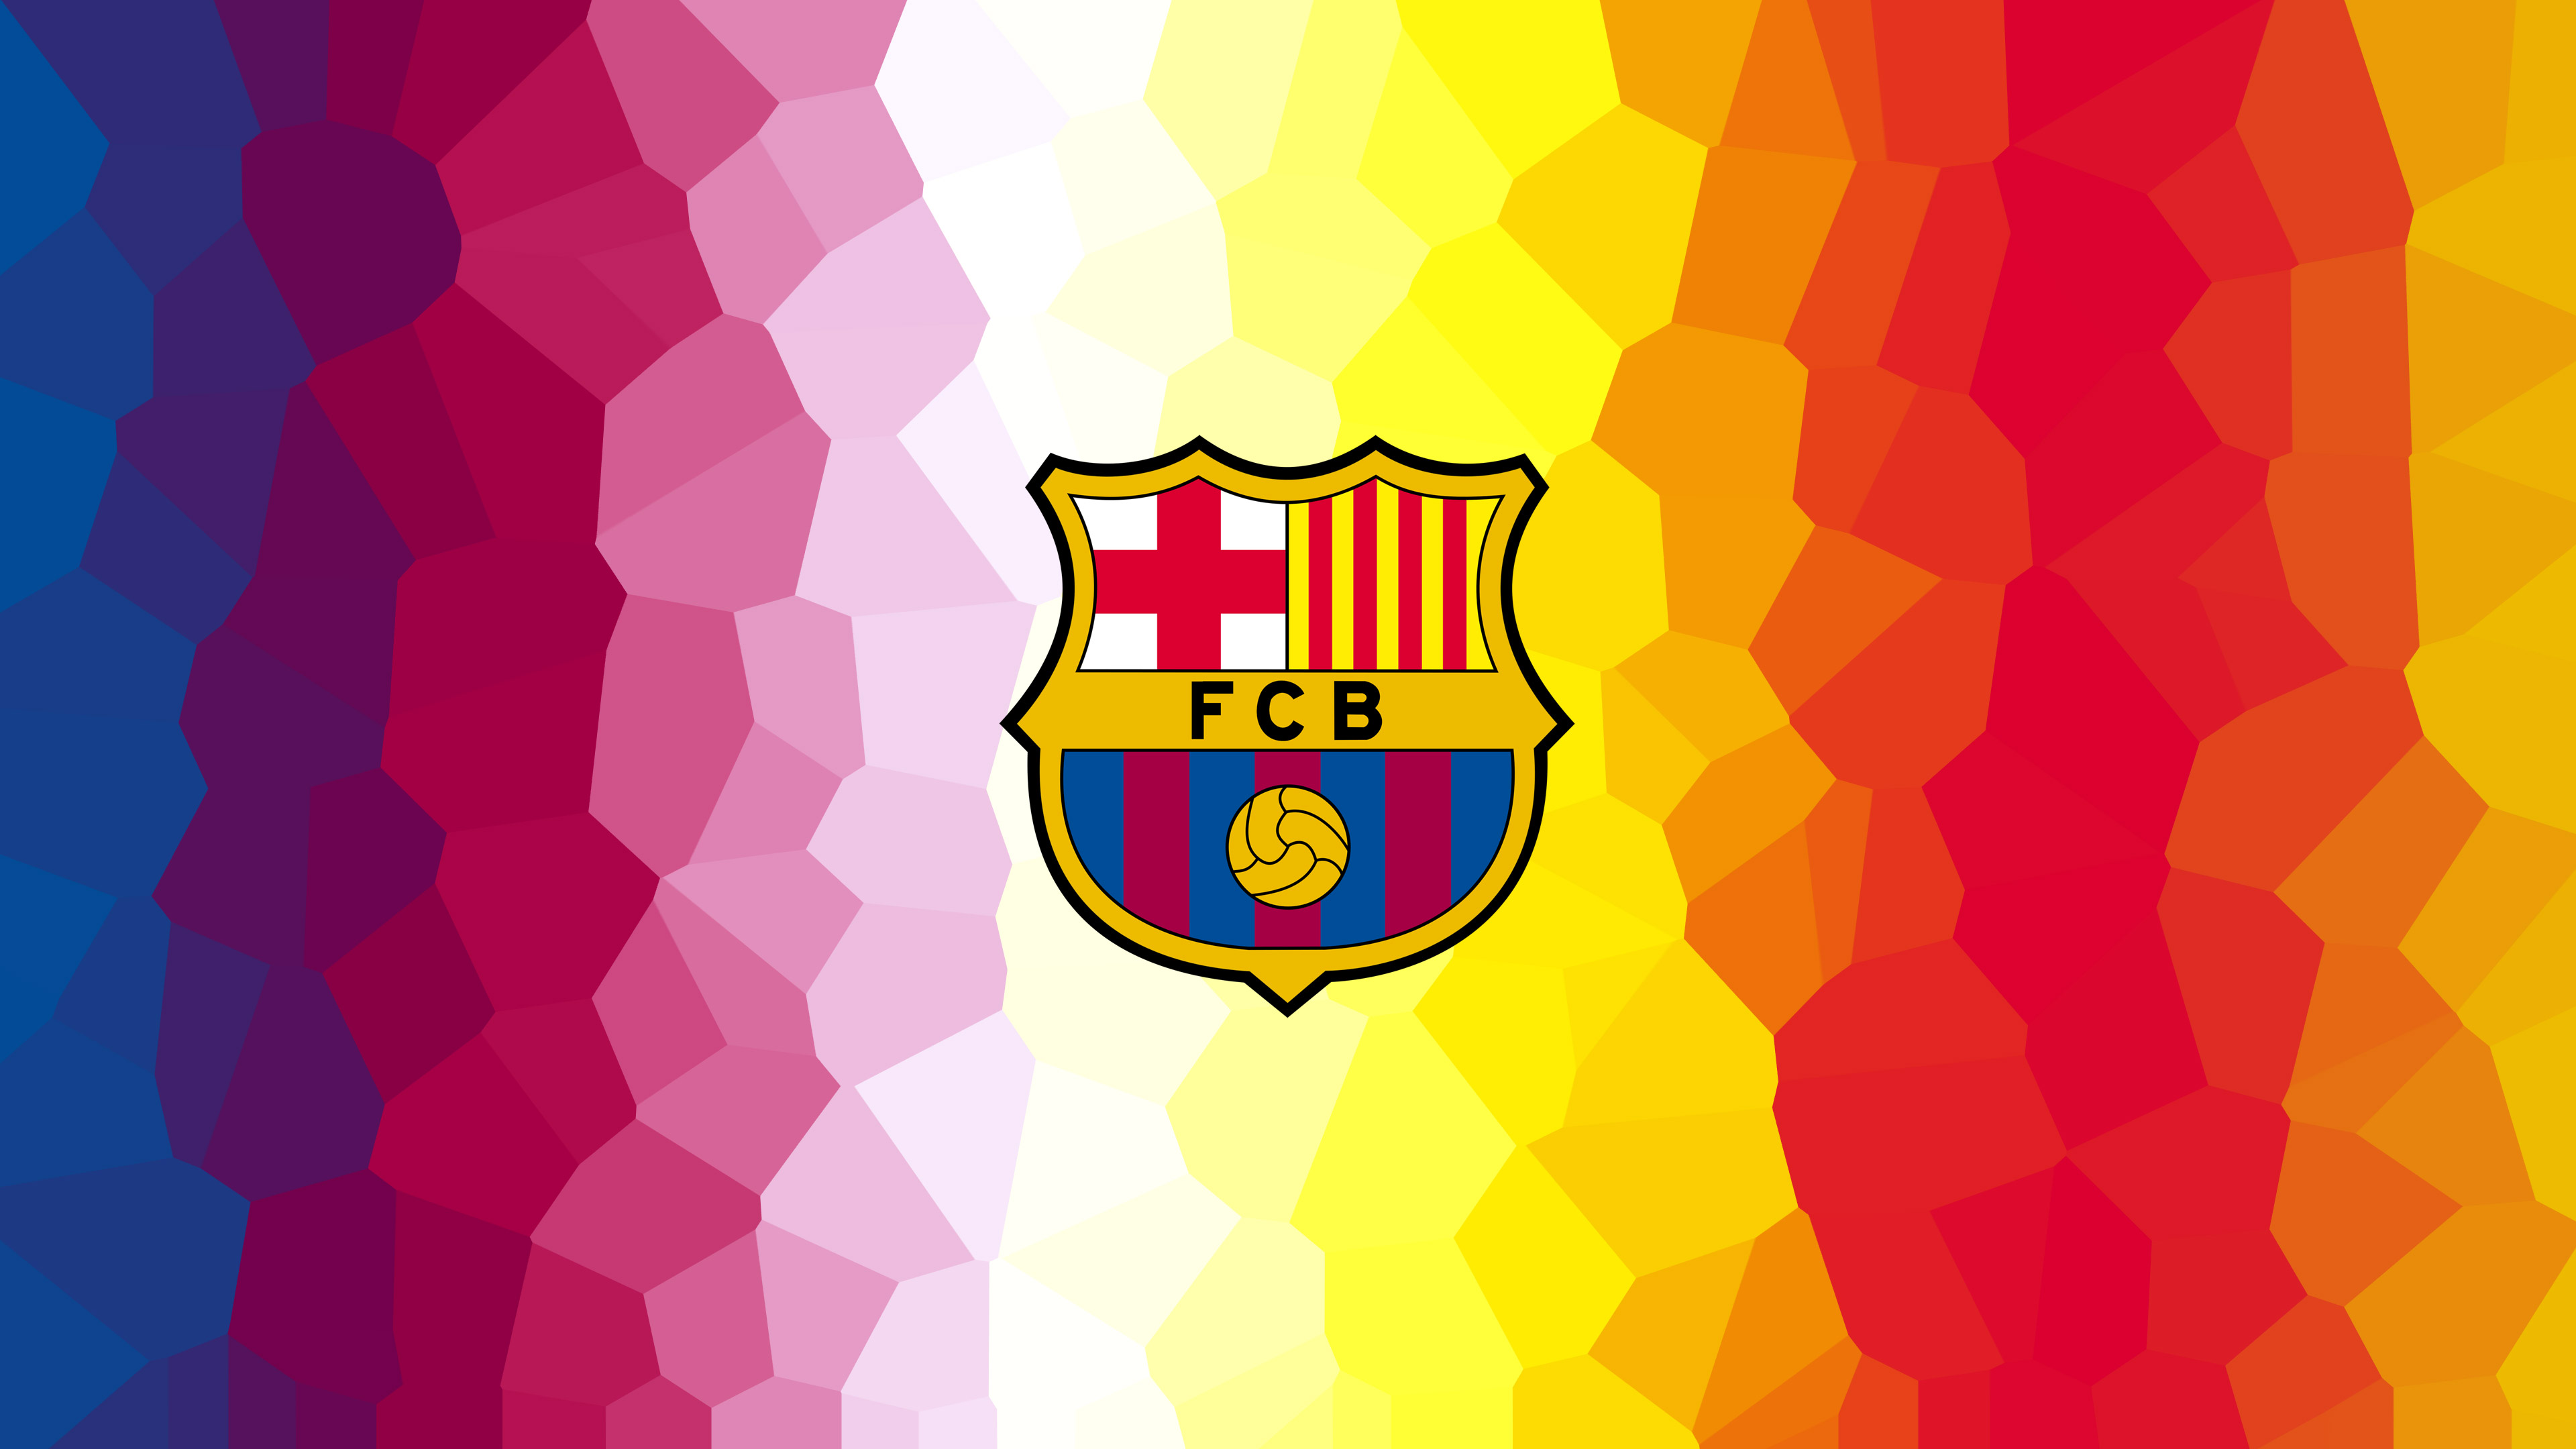 FCB Logo Minimalism, HD Sports, 4k Wallpapers, Images, Backgrounds